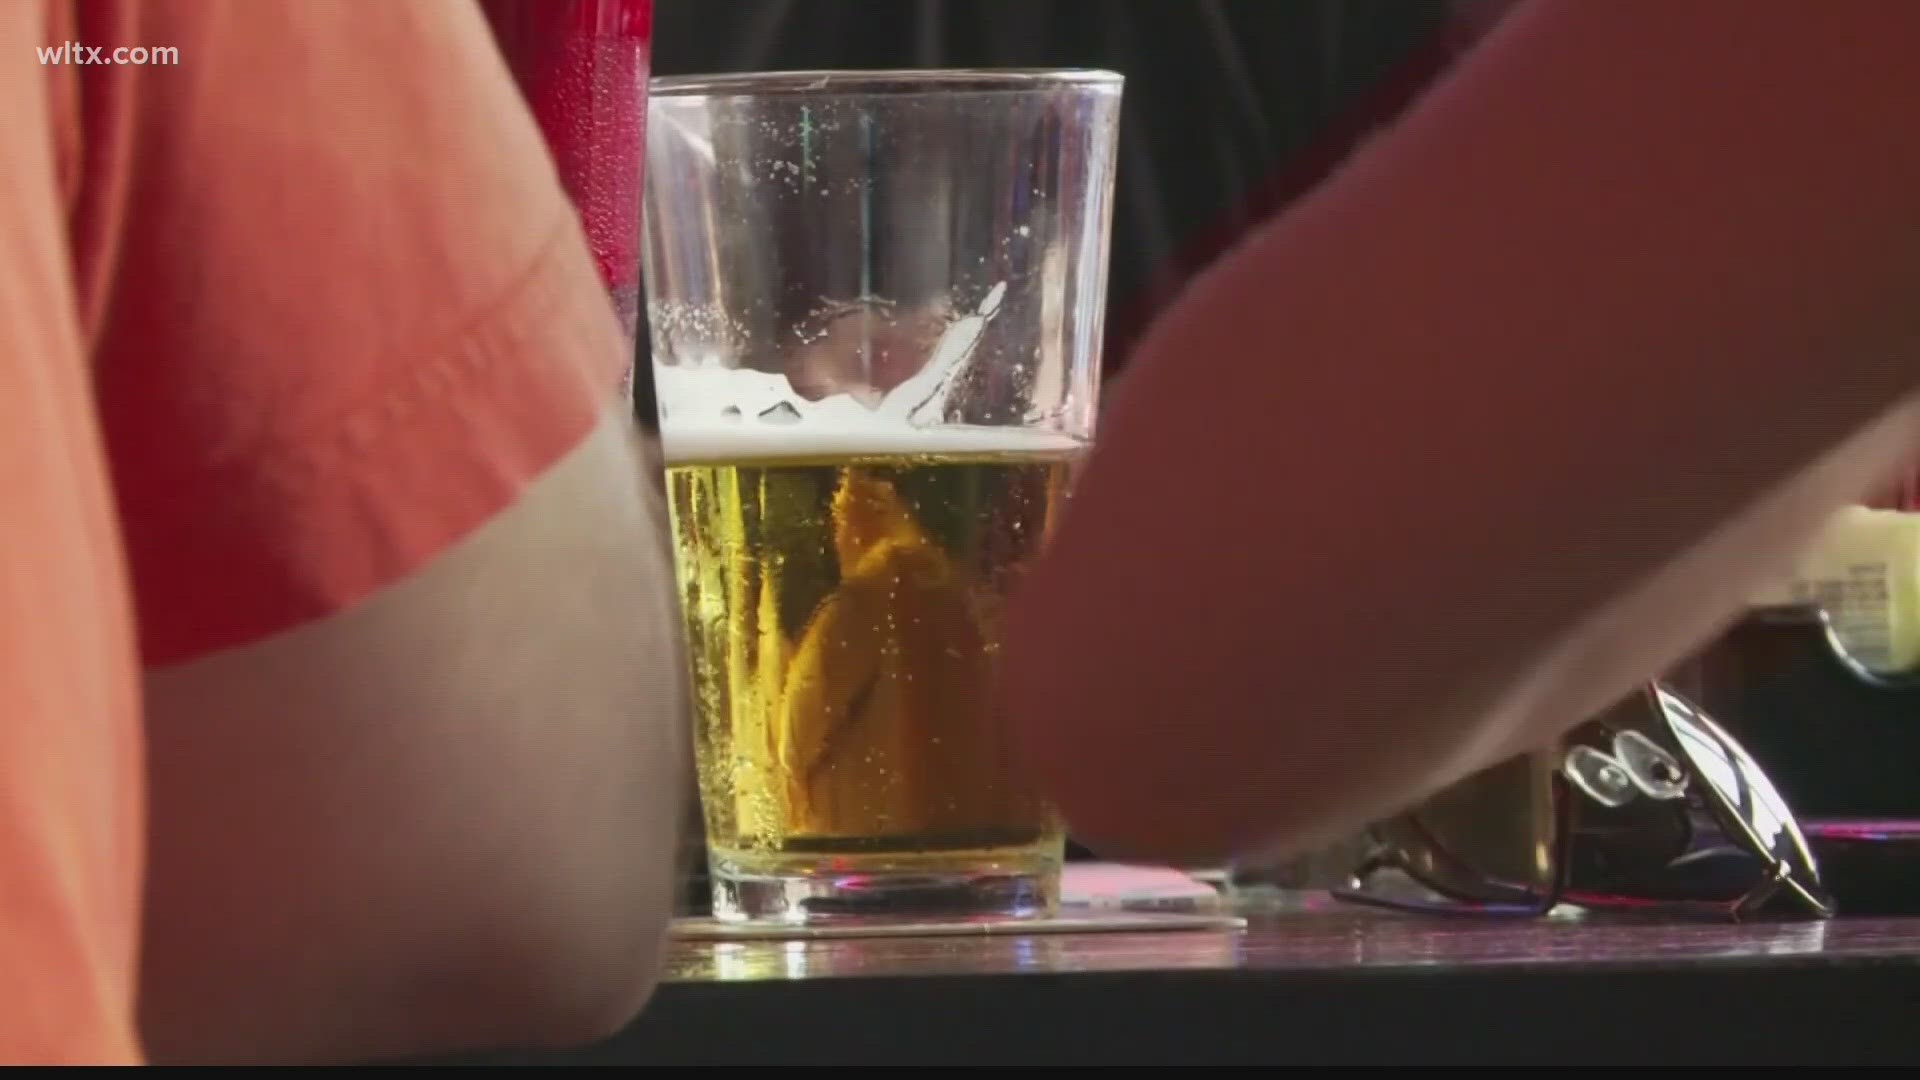 Lawmakers are considering changes that will help the craft beer industry.